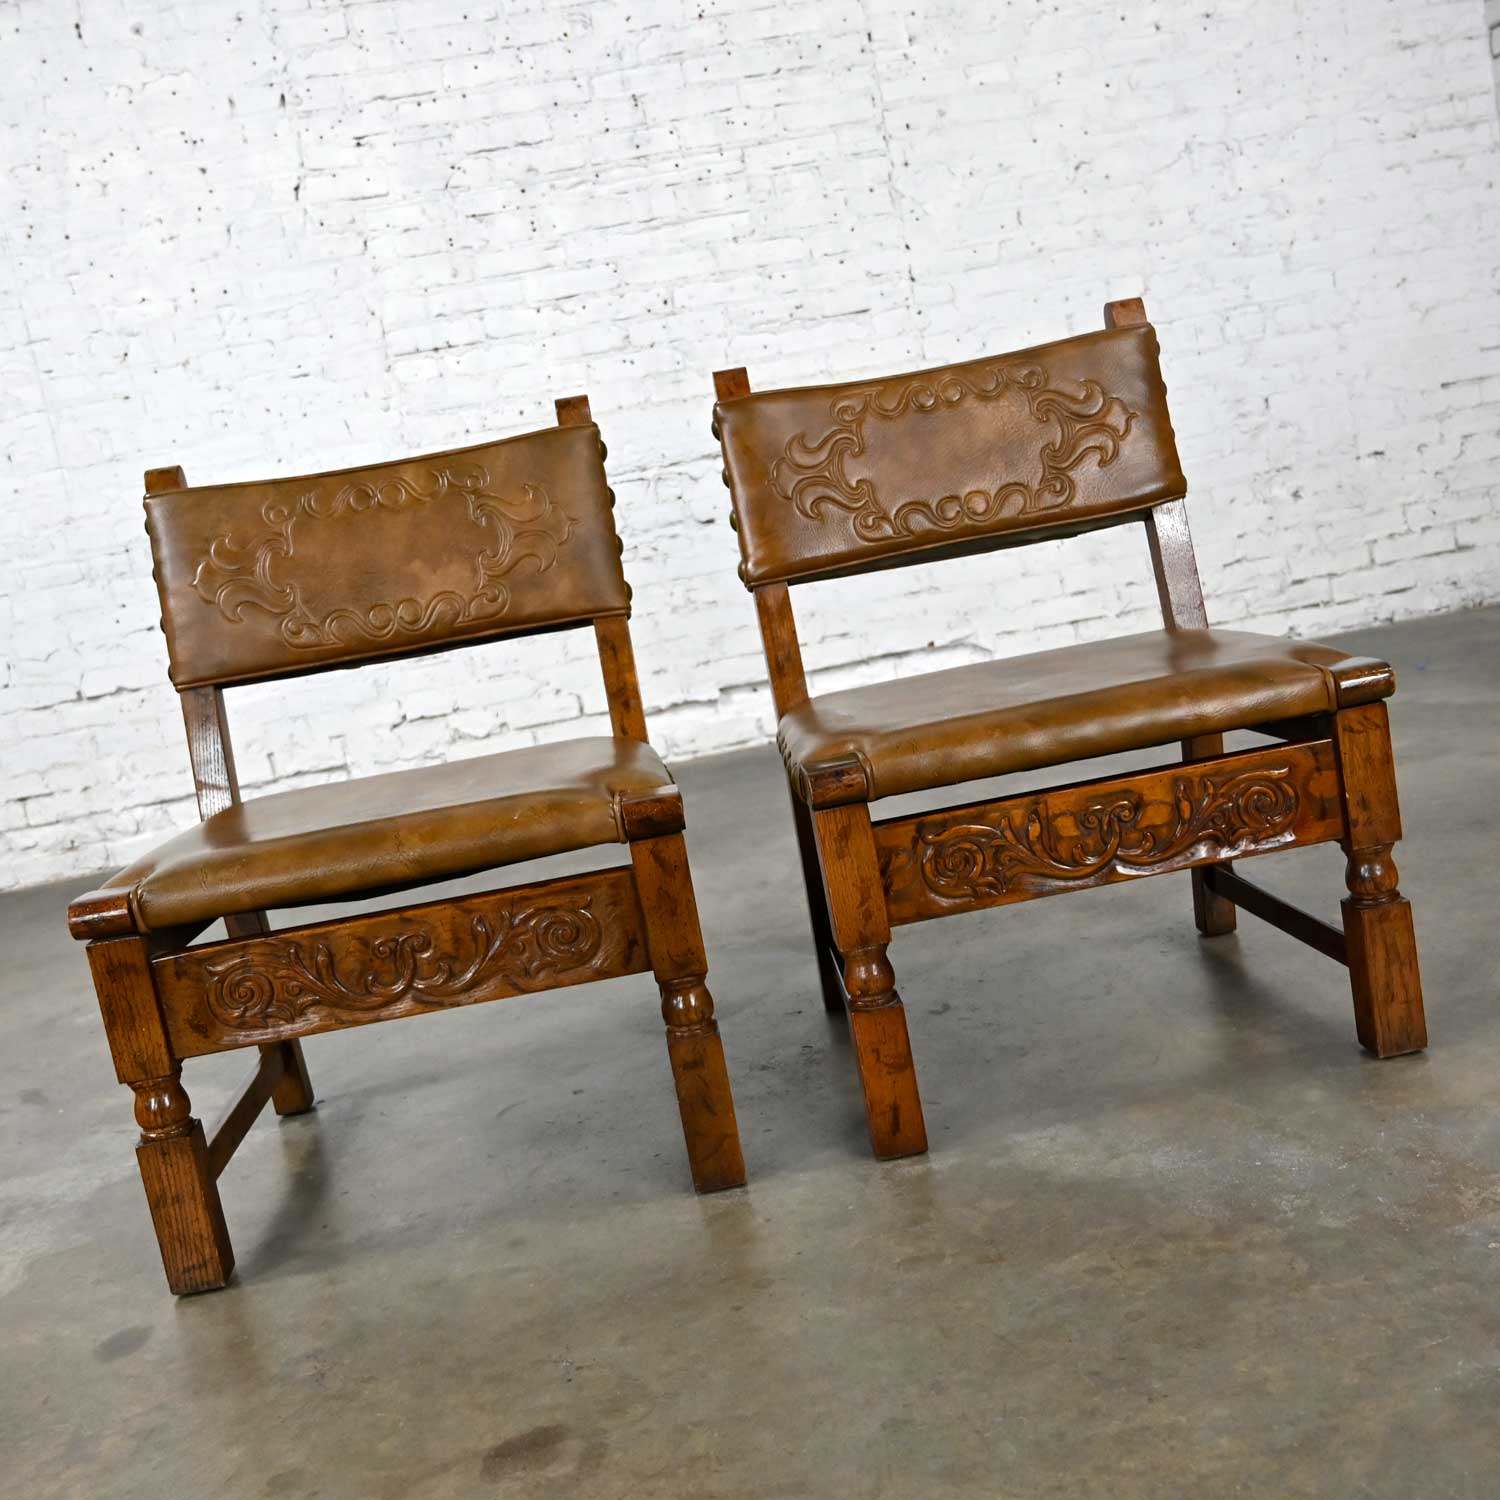 Vintage Spanish Revival Oak Pair of Chairs with Tooled Cognac Faux Leather Seat Backs Style Artes De Mexico